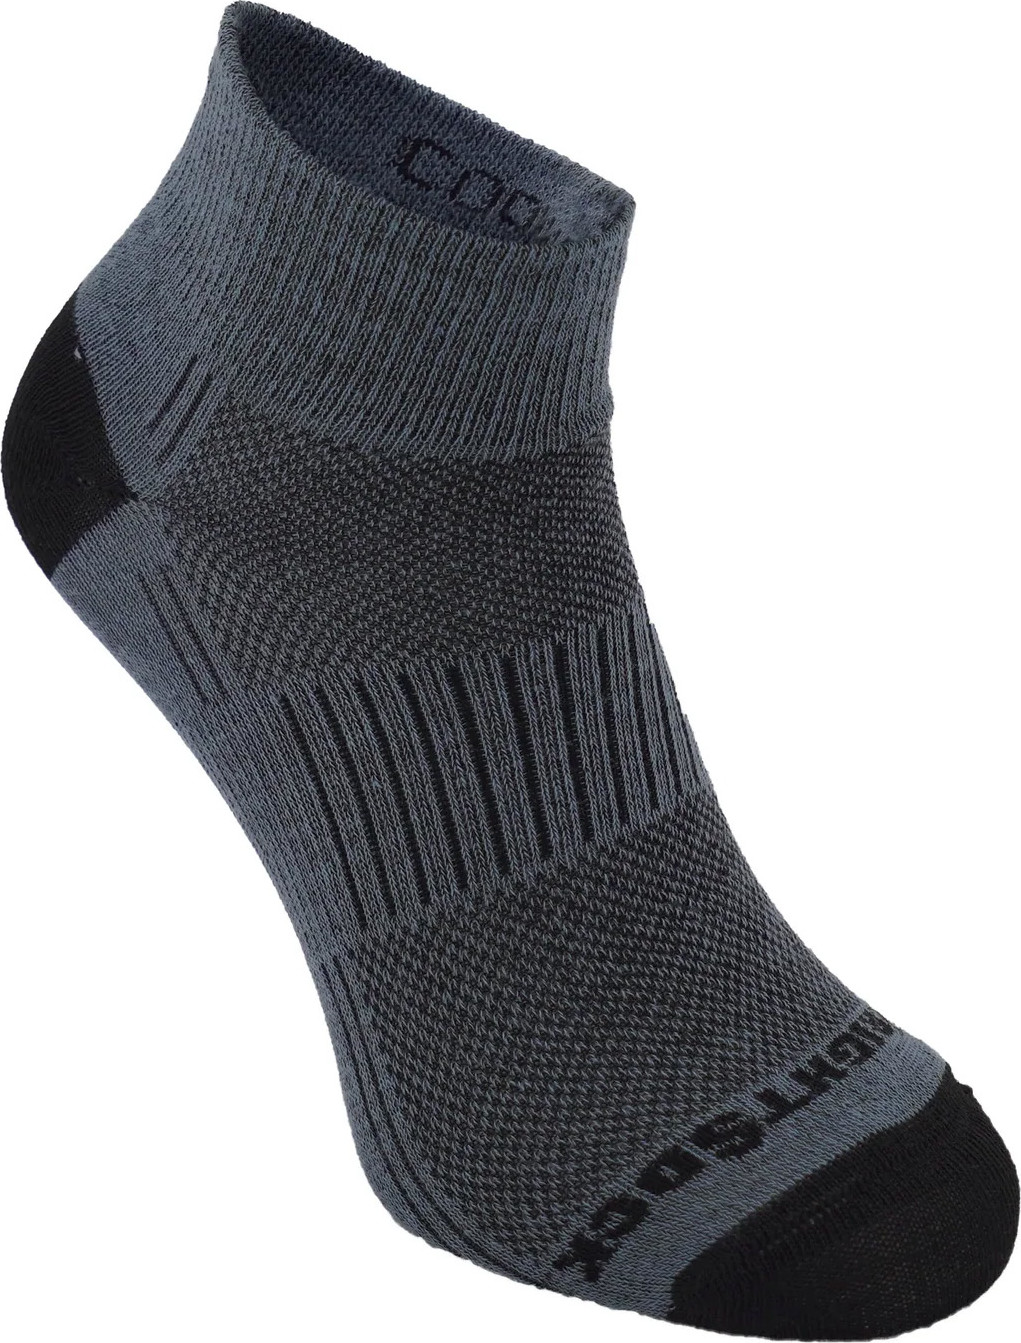 Wrightsock Coolmesh II Quater Anti Blister System Grey